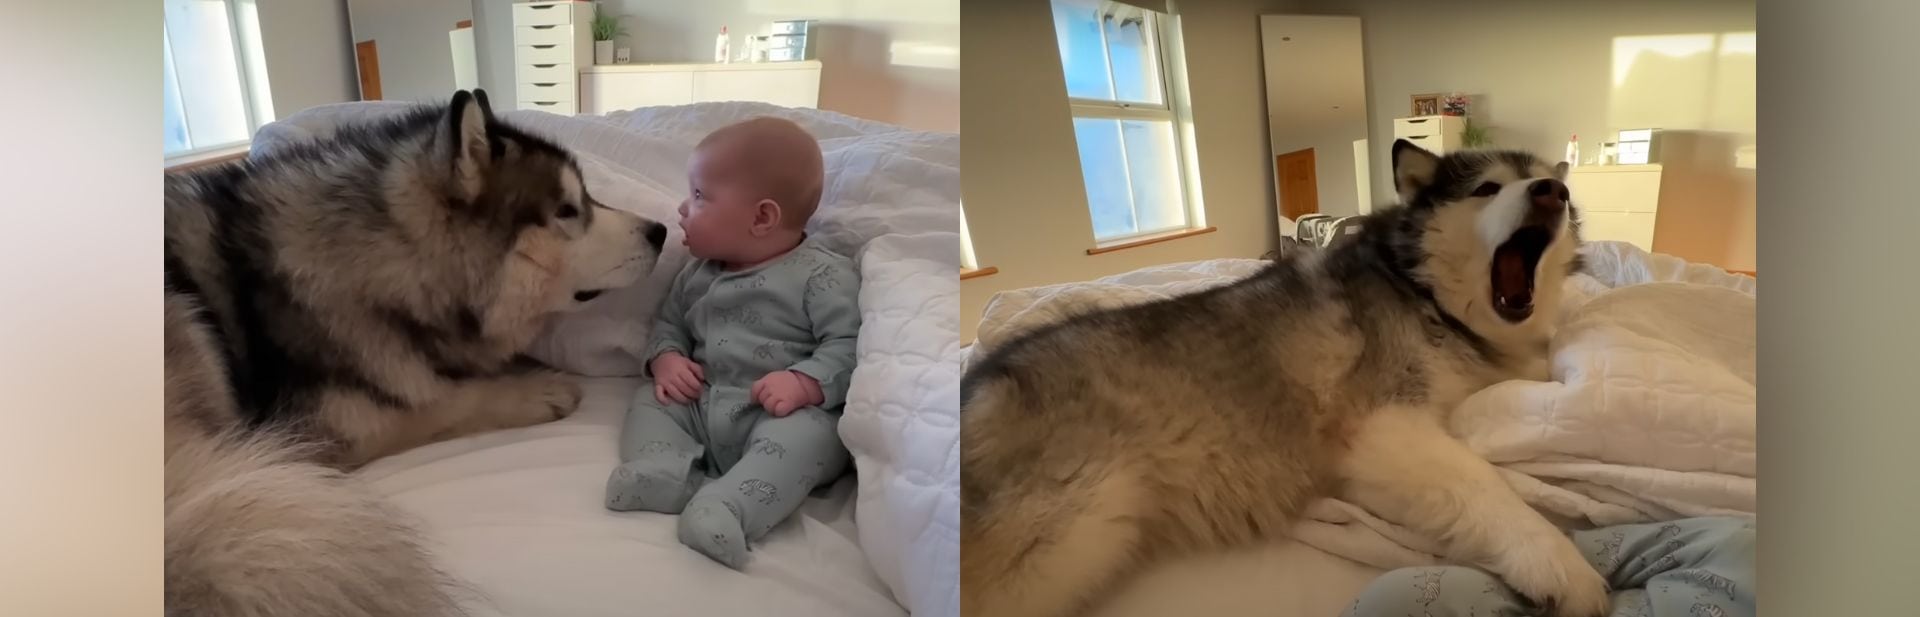 Gentle Giant Dog Gives the Cutest Heartfelt Apology After Baby’s Soft Fall